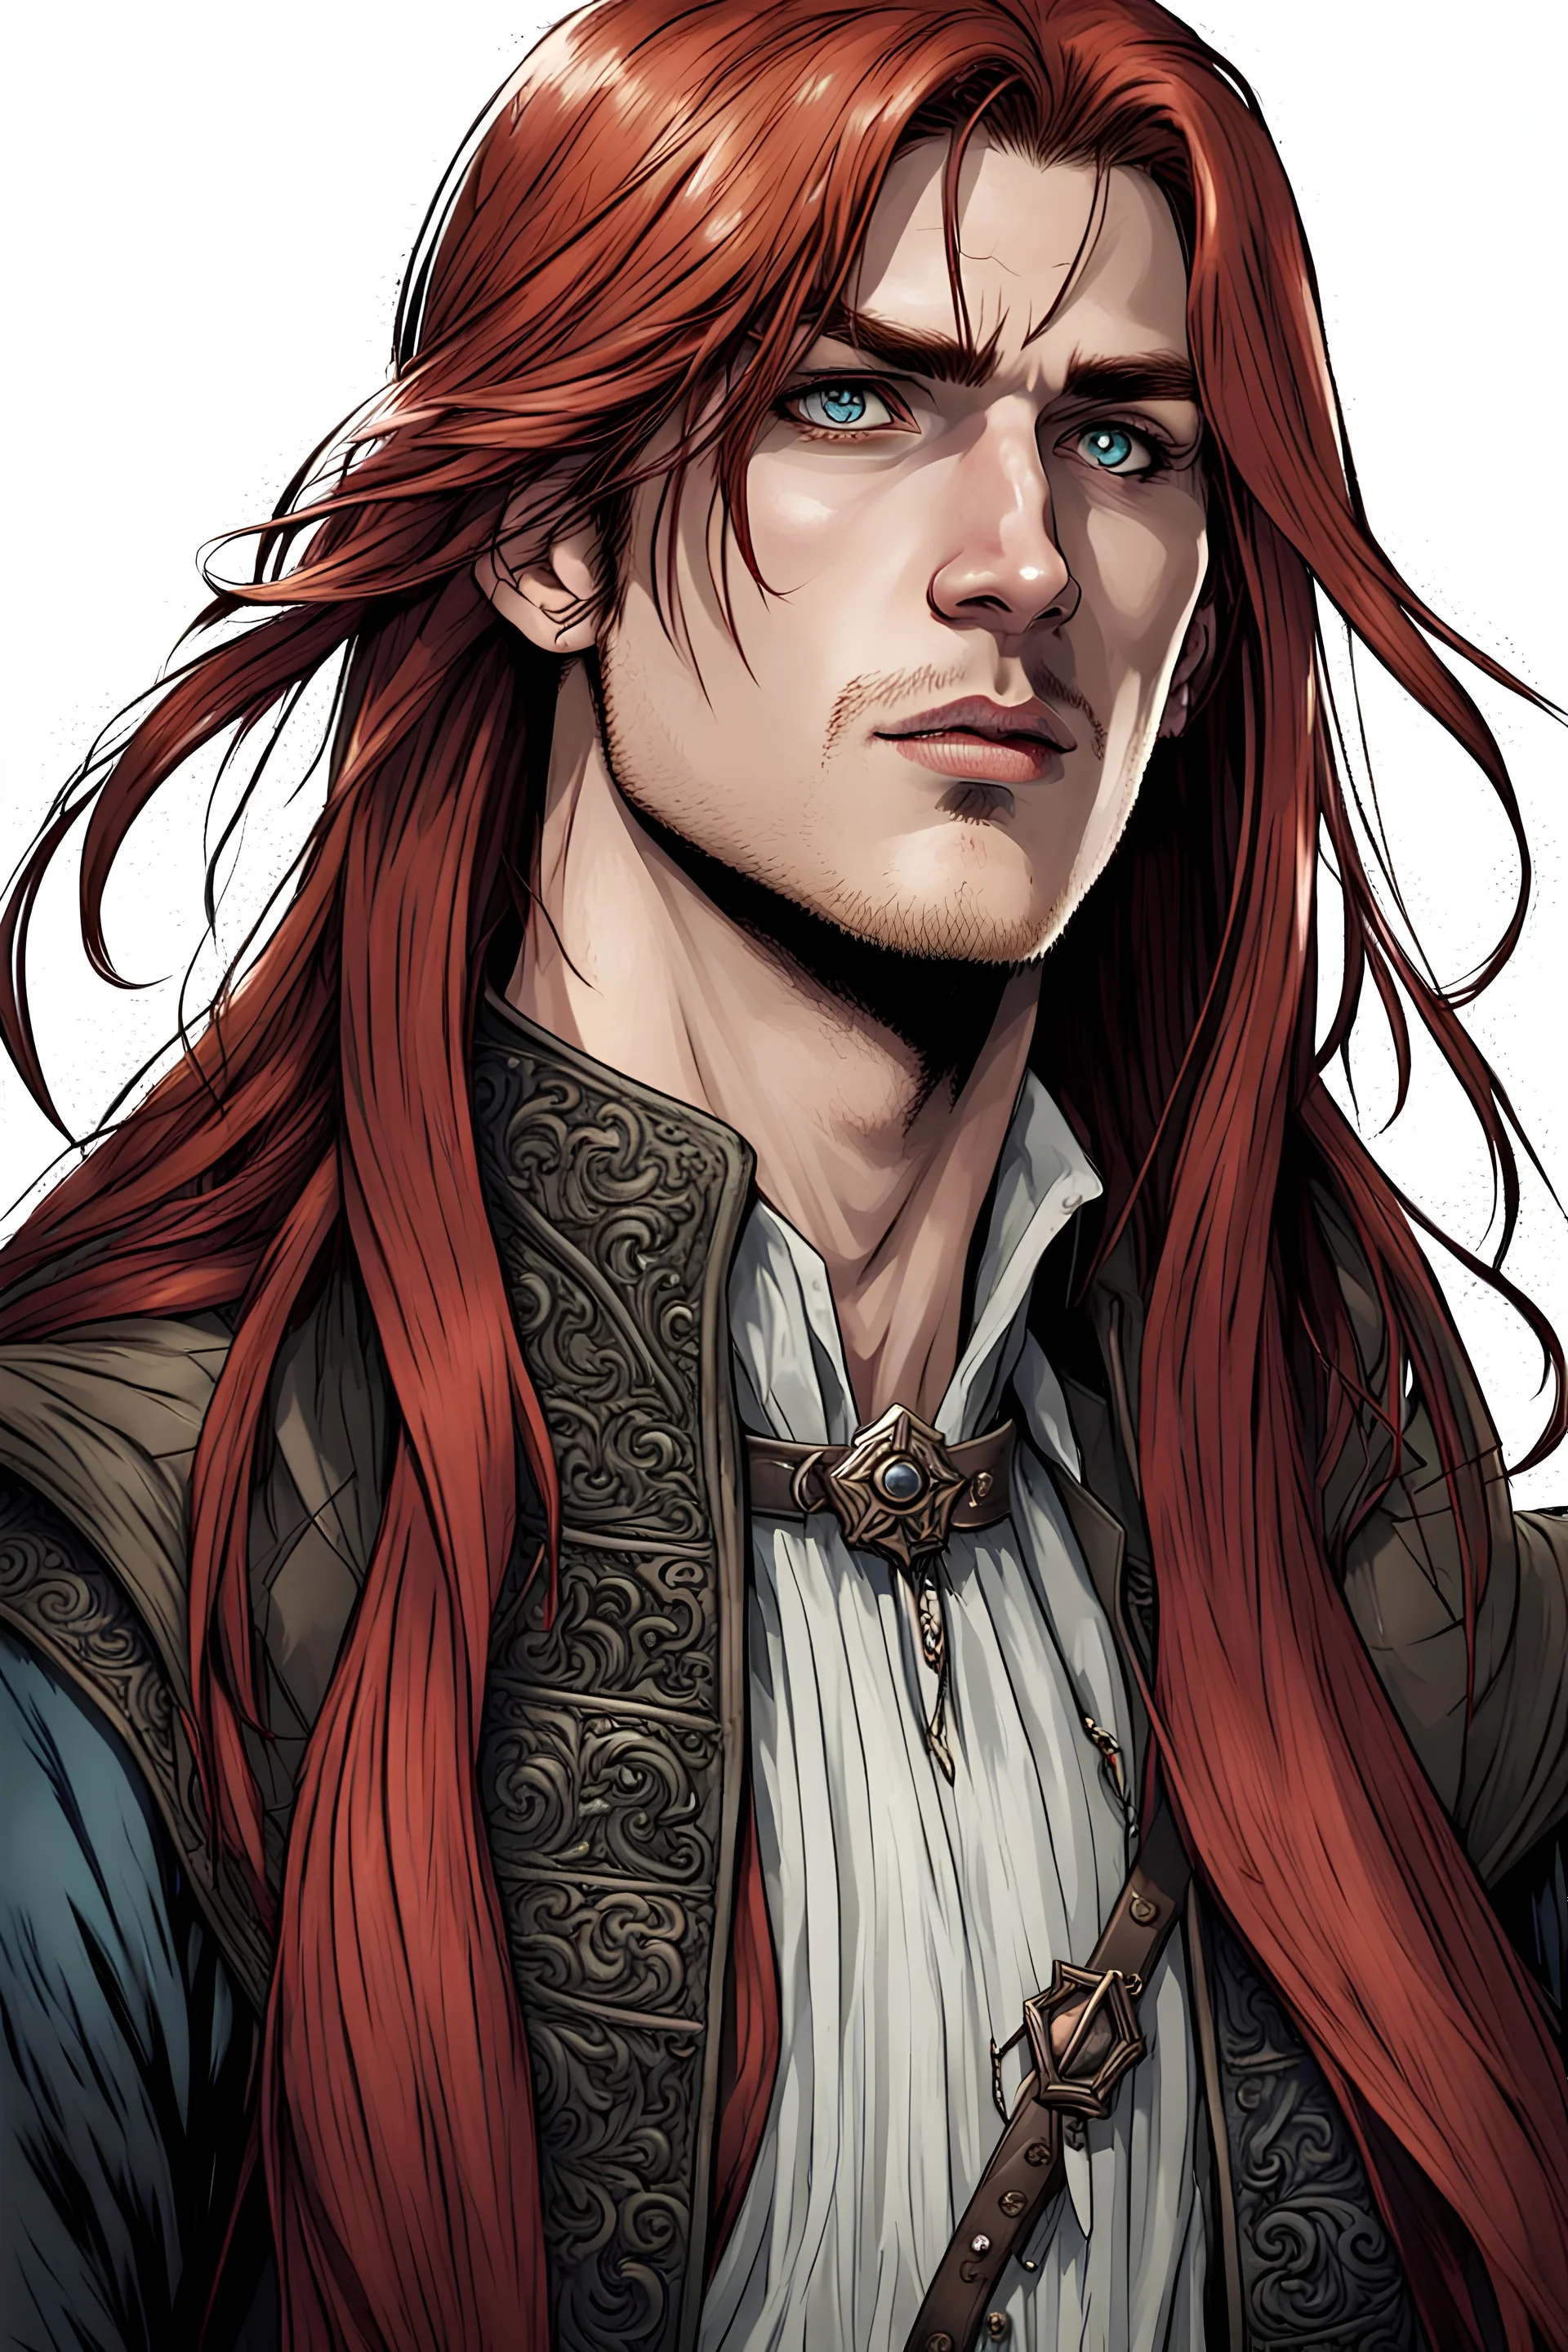 Handsome male half-vampire. 23 years old. Long red hair. Light blue eyes. Wearing fine medieval clothes.